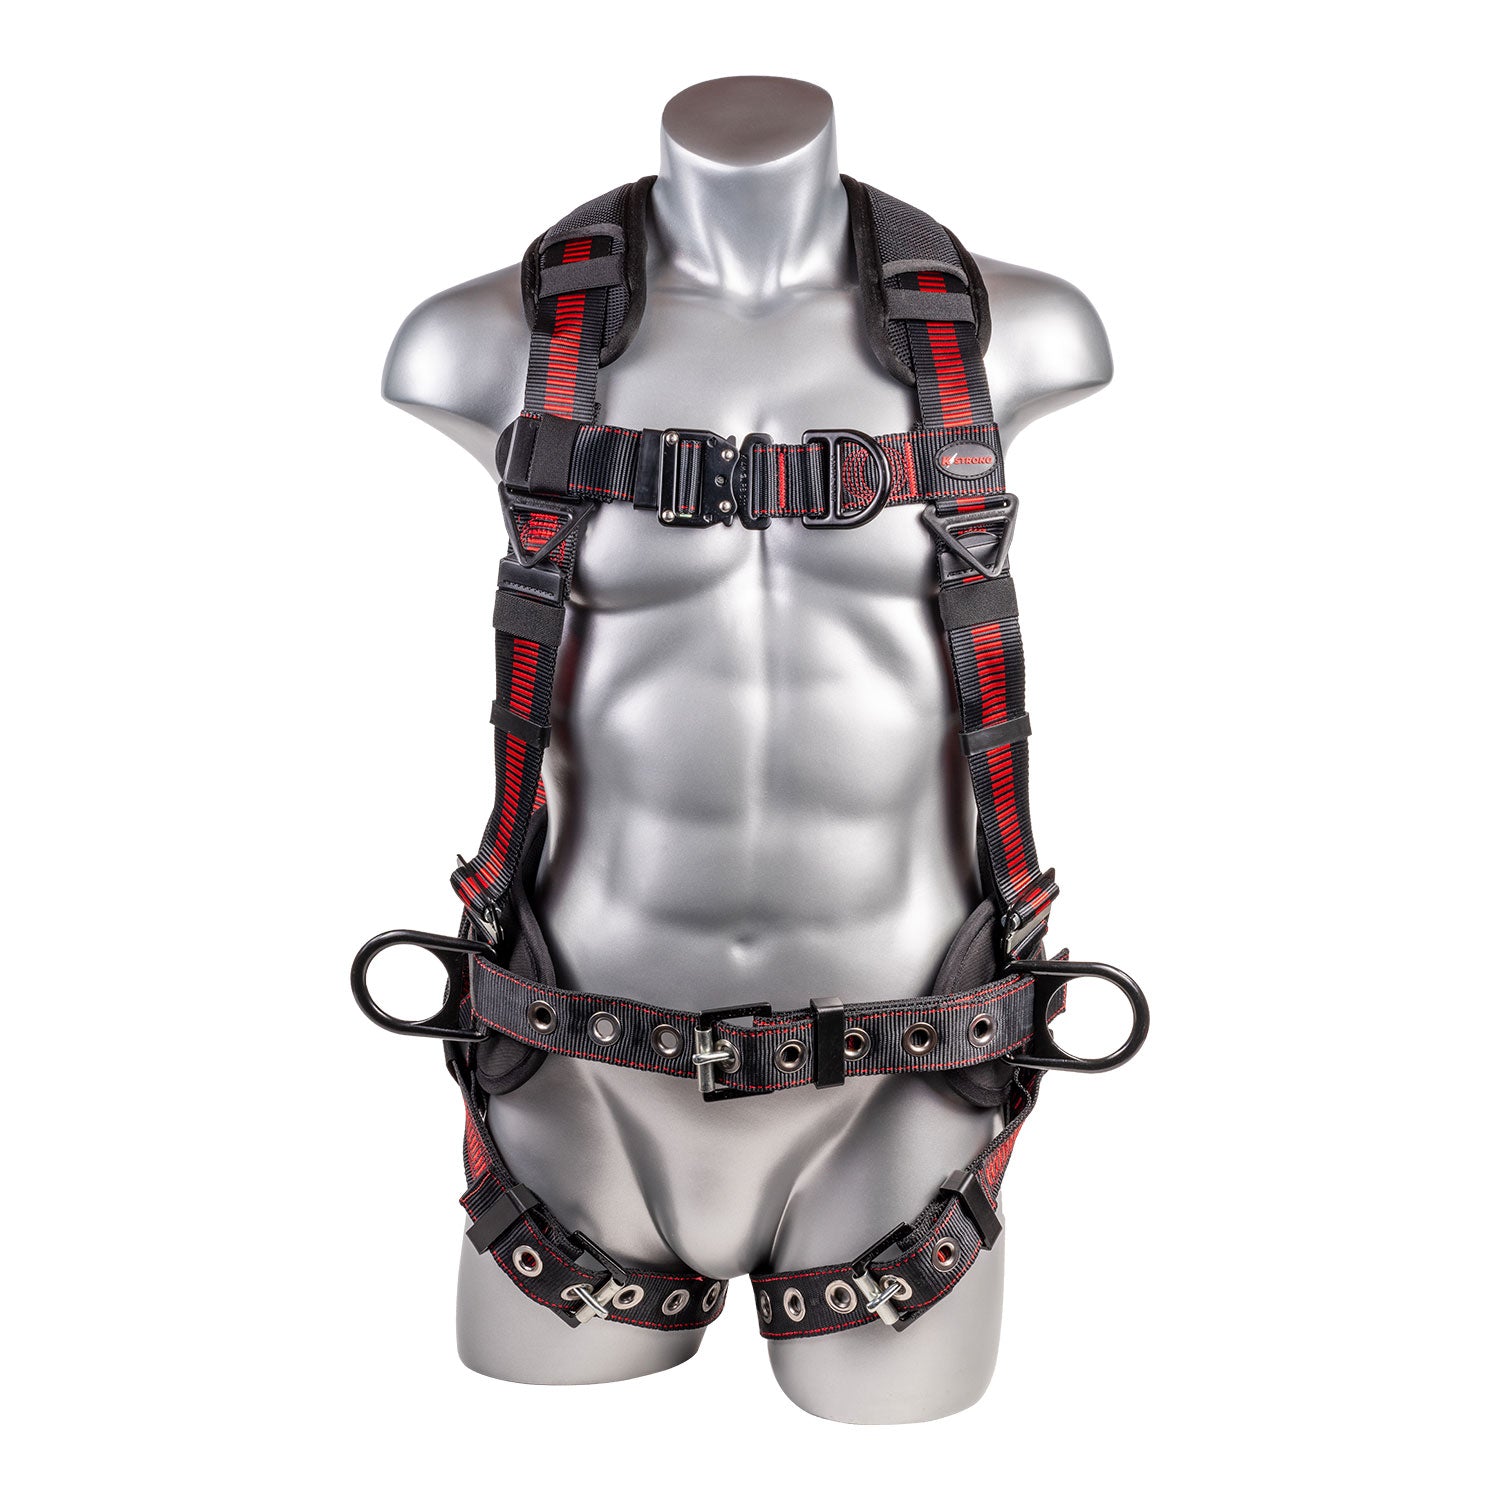 KStrong Kapture™ Epic 5-Point Full Body Harness, Enhanced Dorsal D-ring Plus™, Front D-ring, 2 Side D-rings, Waist Pad w/ Removable Tool Belt, Back/ Shoulder Pad, QC Chest and TB Legs (each)